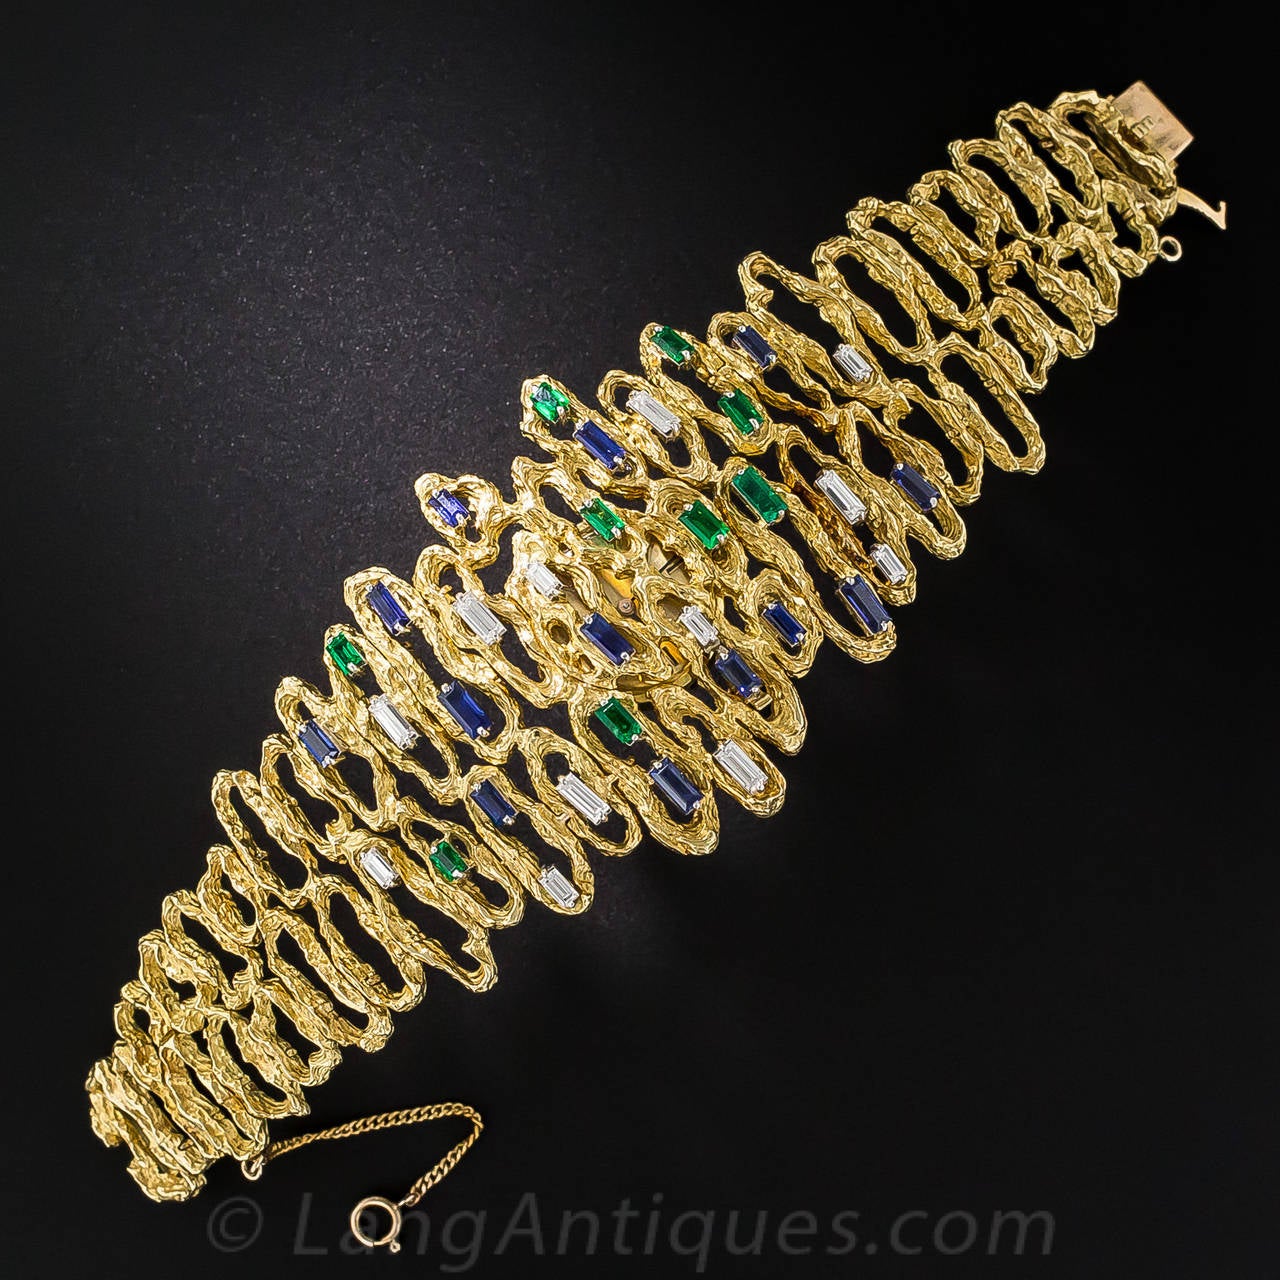 We're just crazy about over-the-top sixties jewelry, especially when its as wild and wonderful as this showstopping (and sizable) stunner. This abstract work of wearable art is rendered in richly textured 18K yellow gold and glistens and sparkles